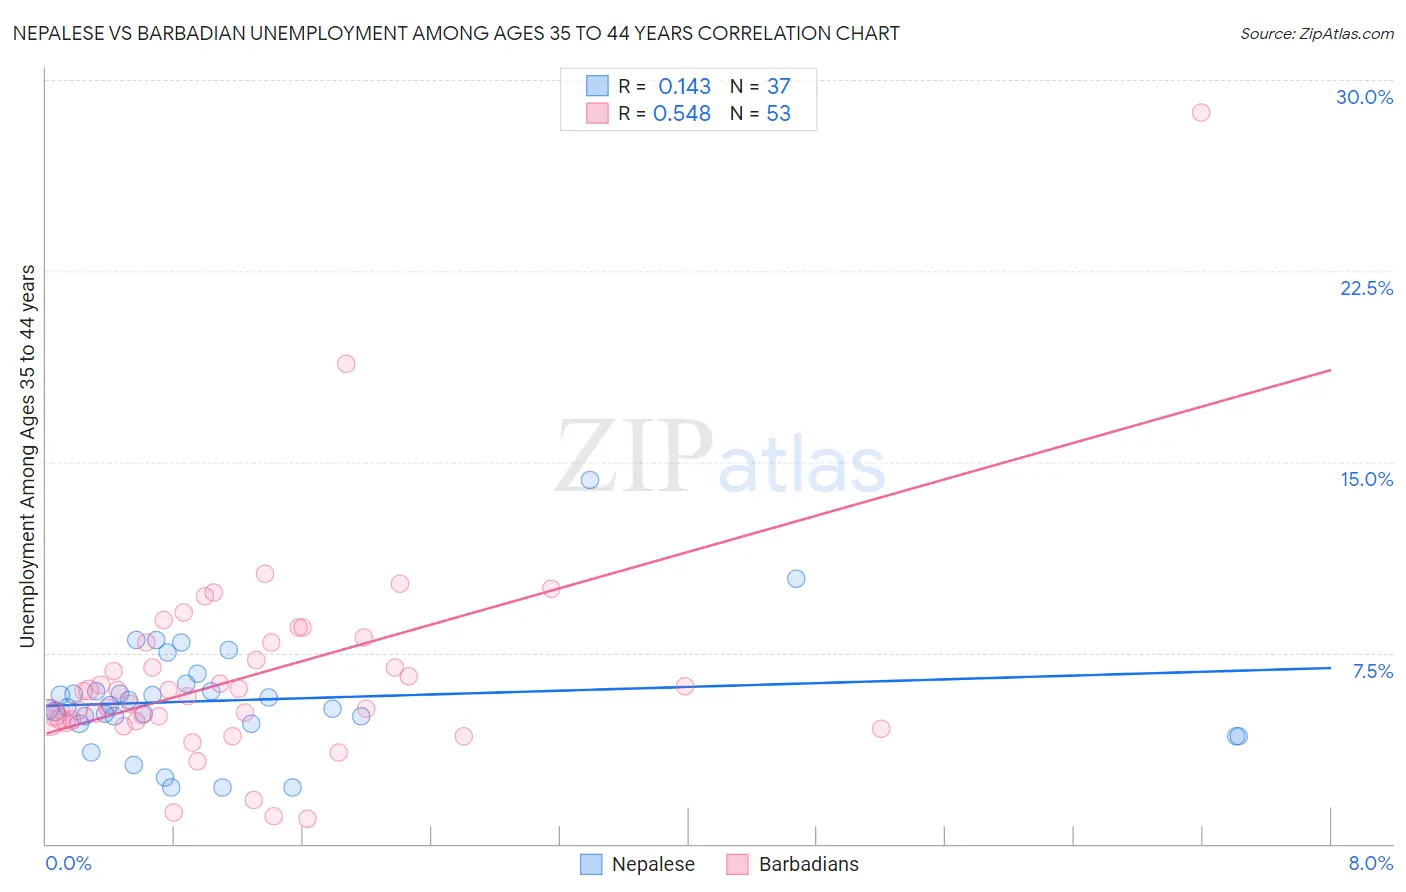 Nepalese vs Barbadian Unemployment Among Ages 35 to 44 years